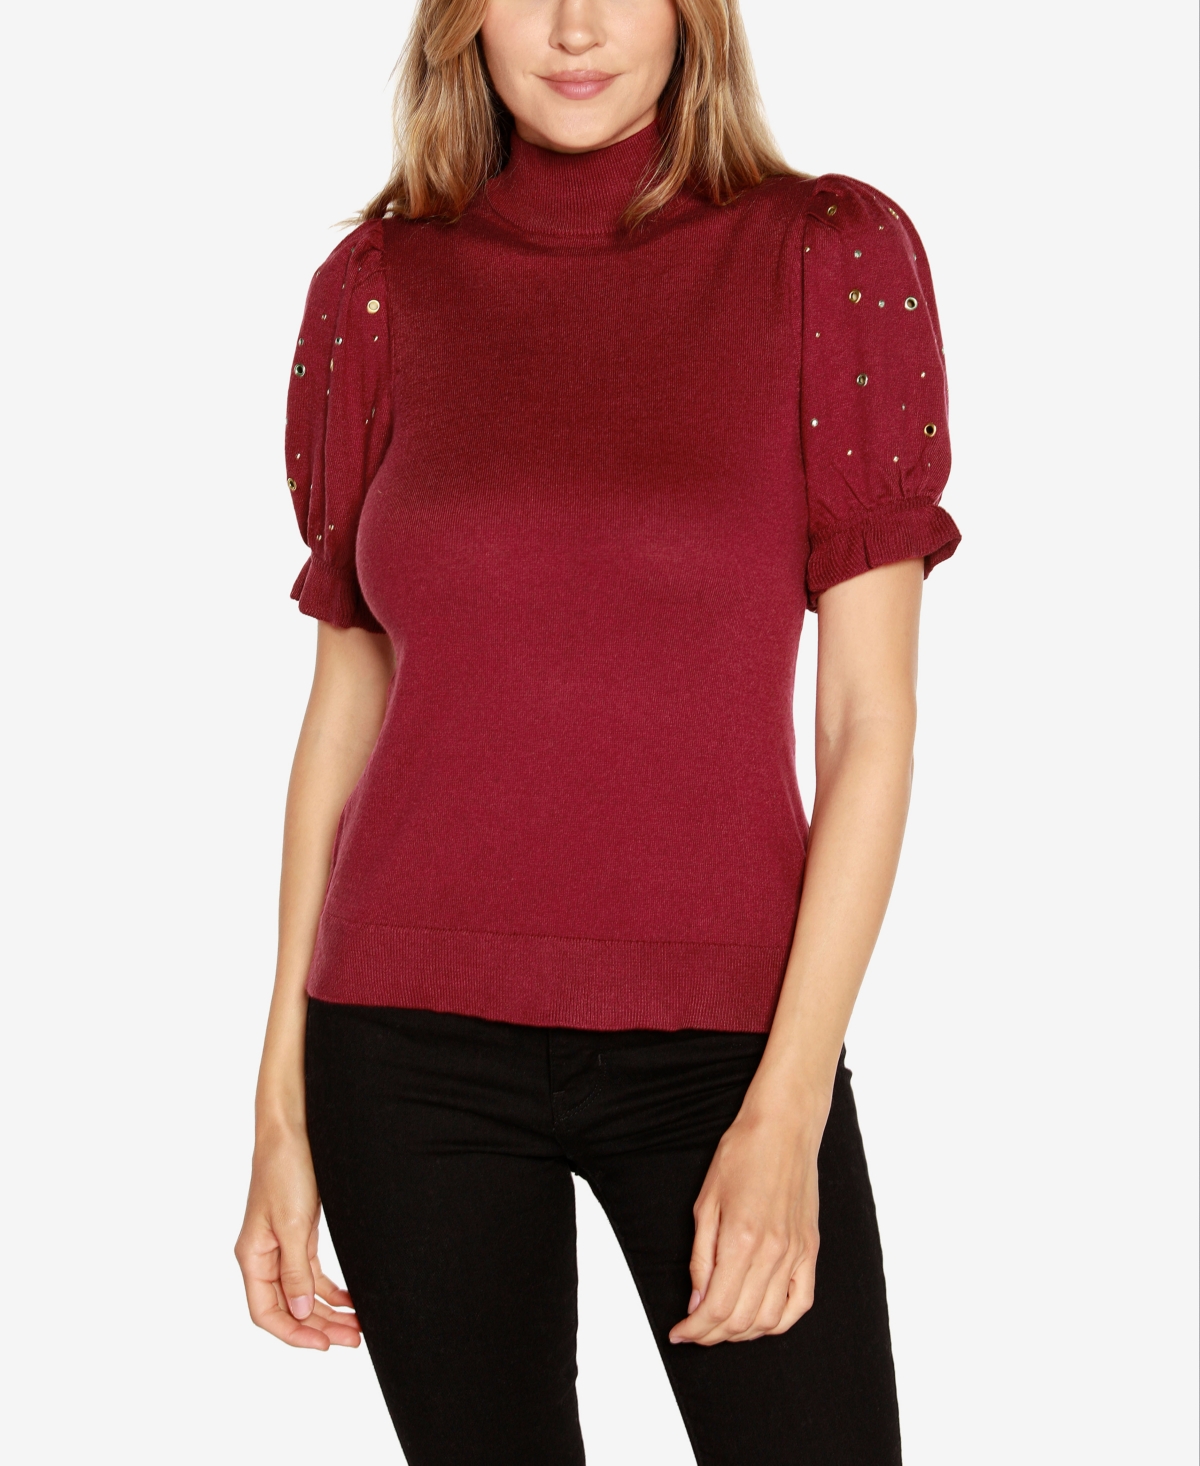 Belldini Black Label Women's Embellished Puff-sleeve Sweater In Cranberry